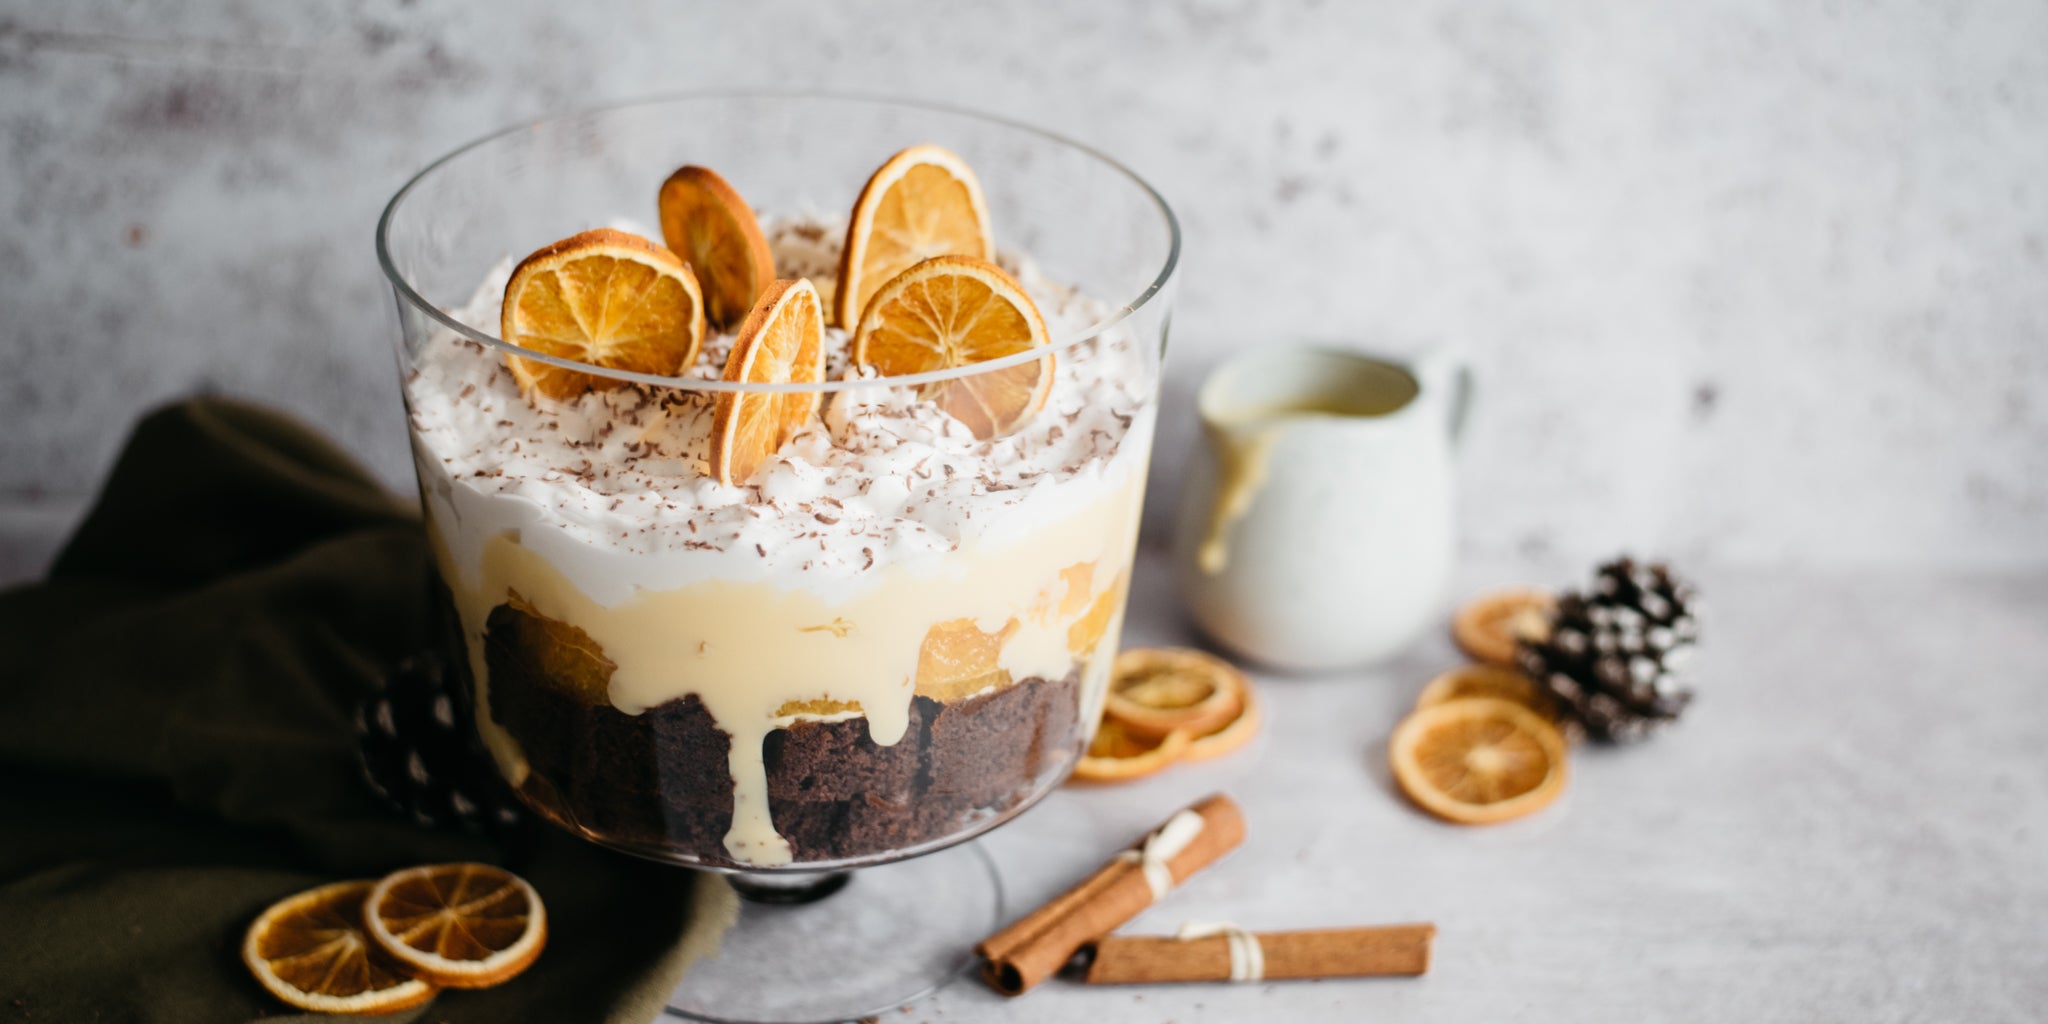 Close up of Chocolate Orange Trifle with slices of orange and sprinkles of chocolate on the top. Jug of Baileys custard in the background